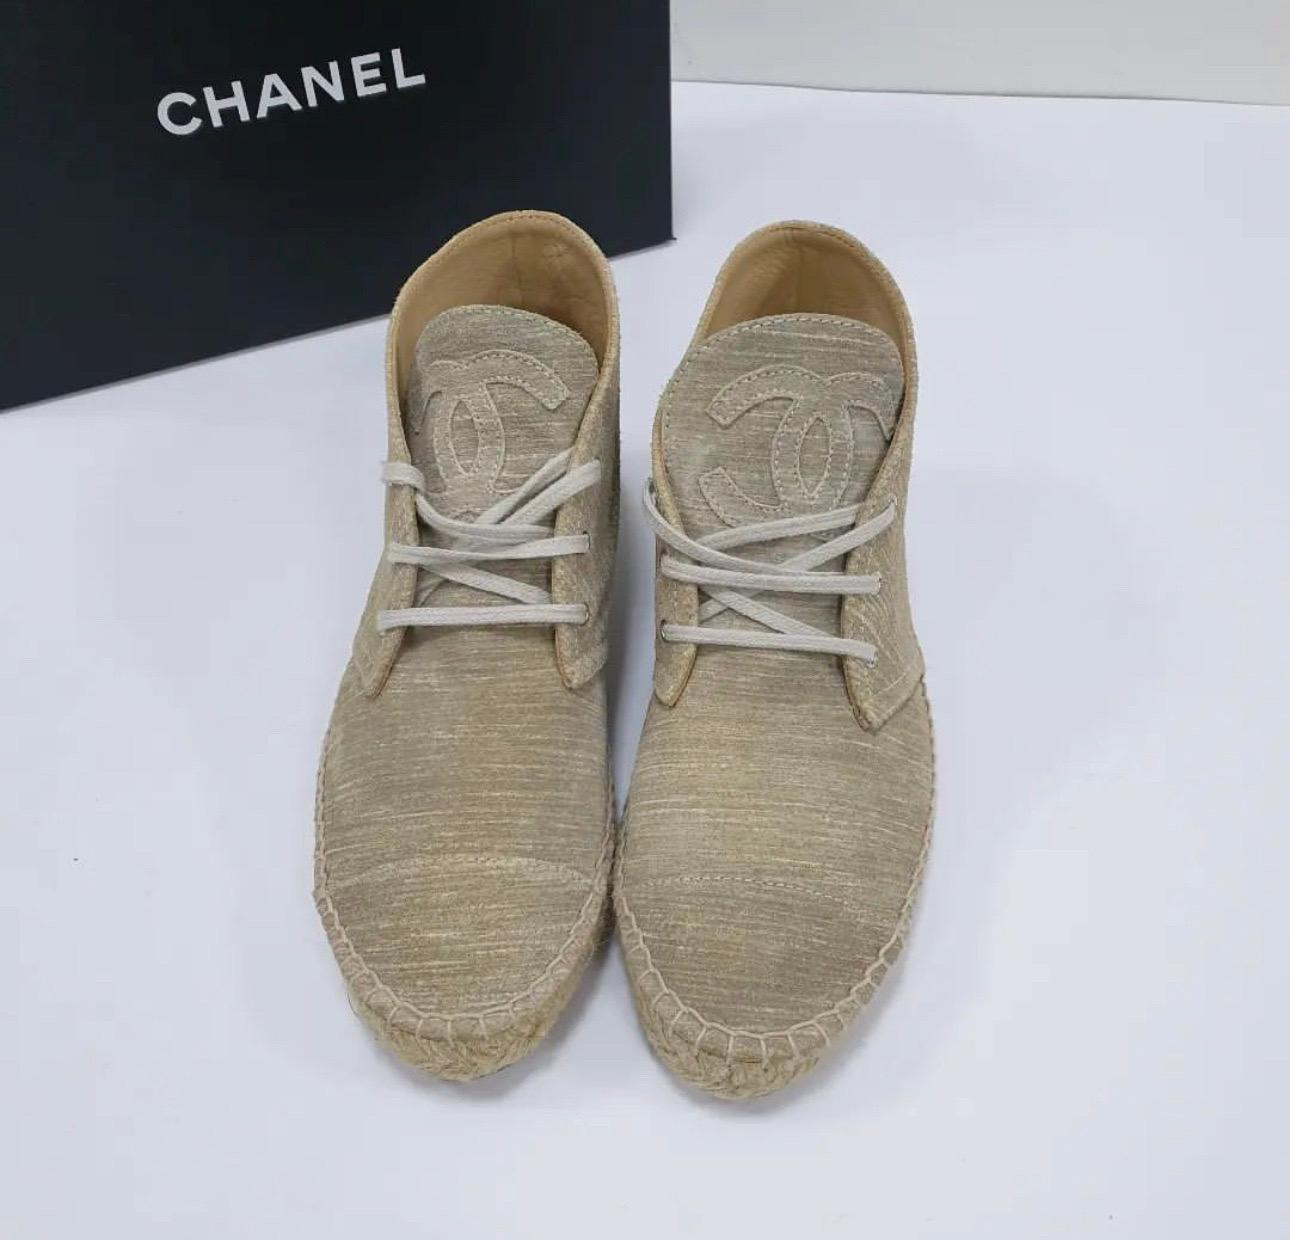 Chanel's lace-up espadrilles in cream linen, featuring the brand's trademark interlocking CC logo on the tongue in a matching frayed cream linen, they have a thick jute sole and a reinforced canvas toe which offers a comfortable and supportive